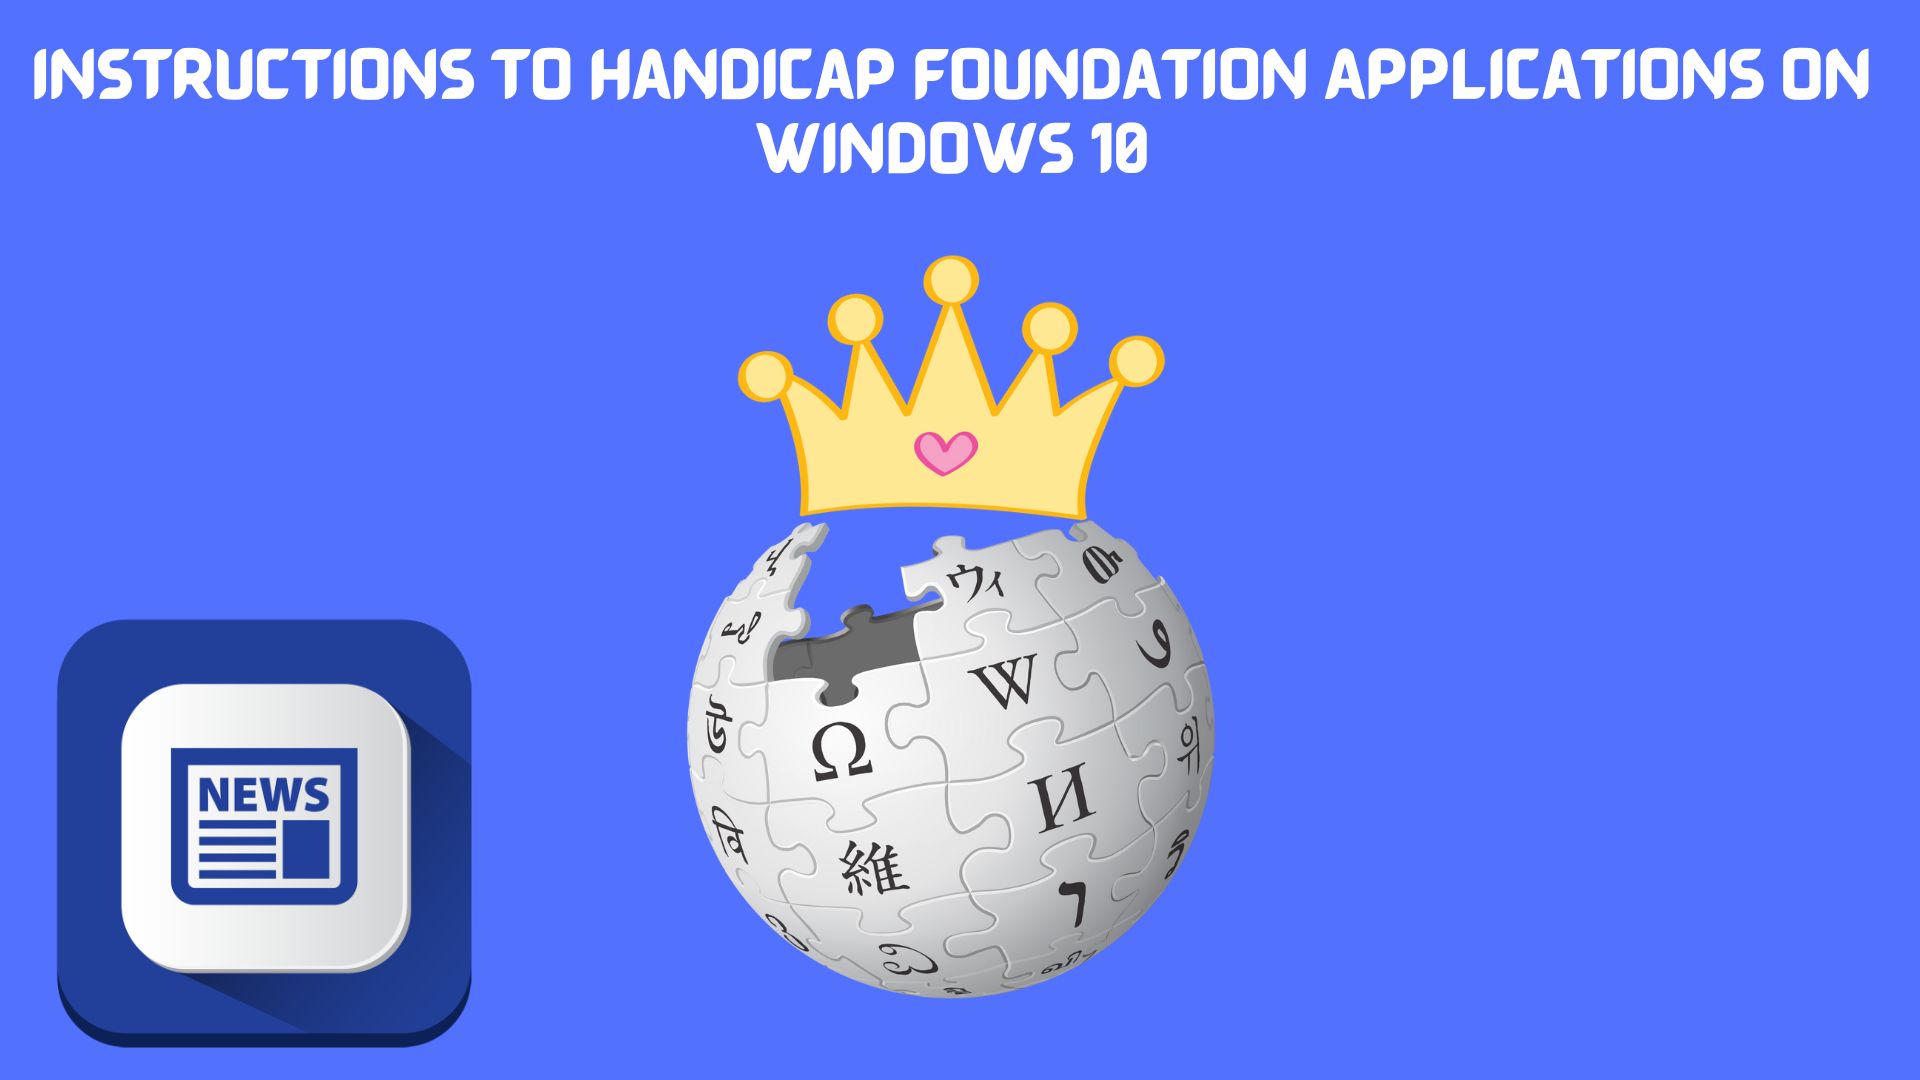 Instructions to handicap foundation applications on windows 10